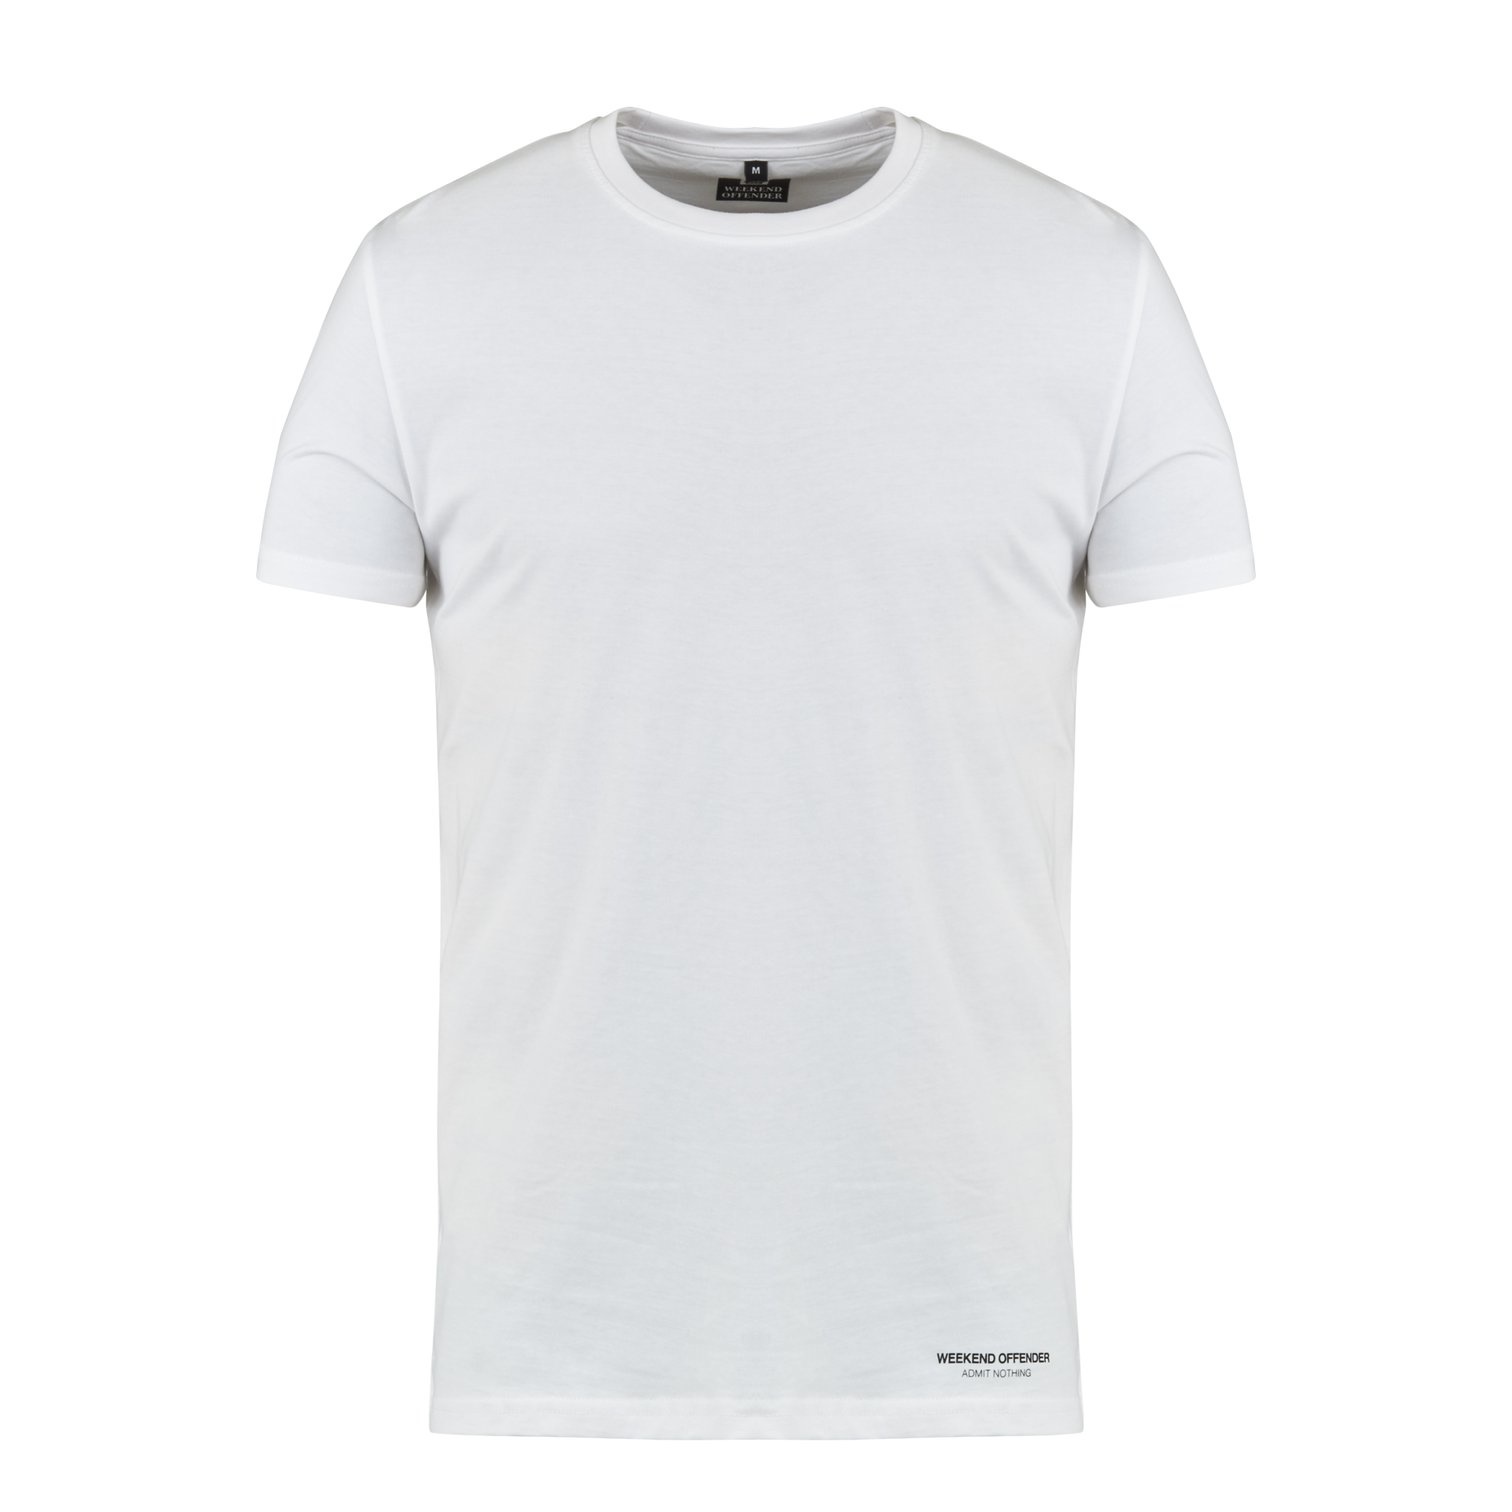 Weekend Offender WOTS010 Prison Issue Twin Pack T-Shirts in Black White 